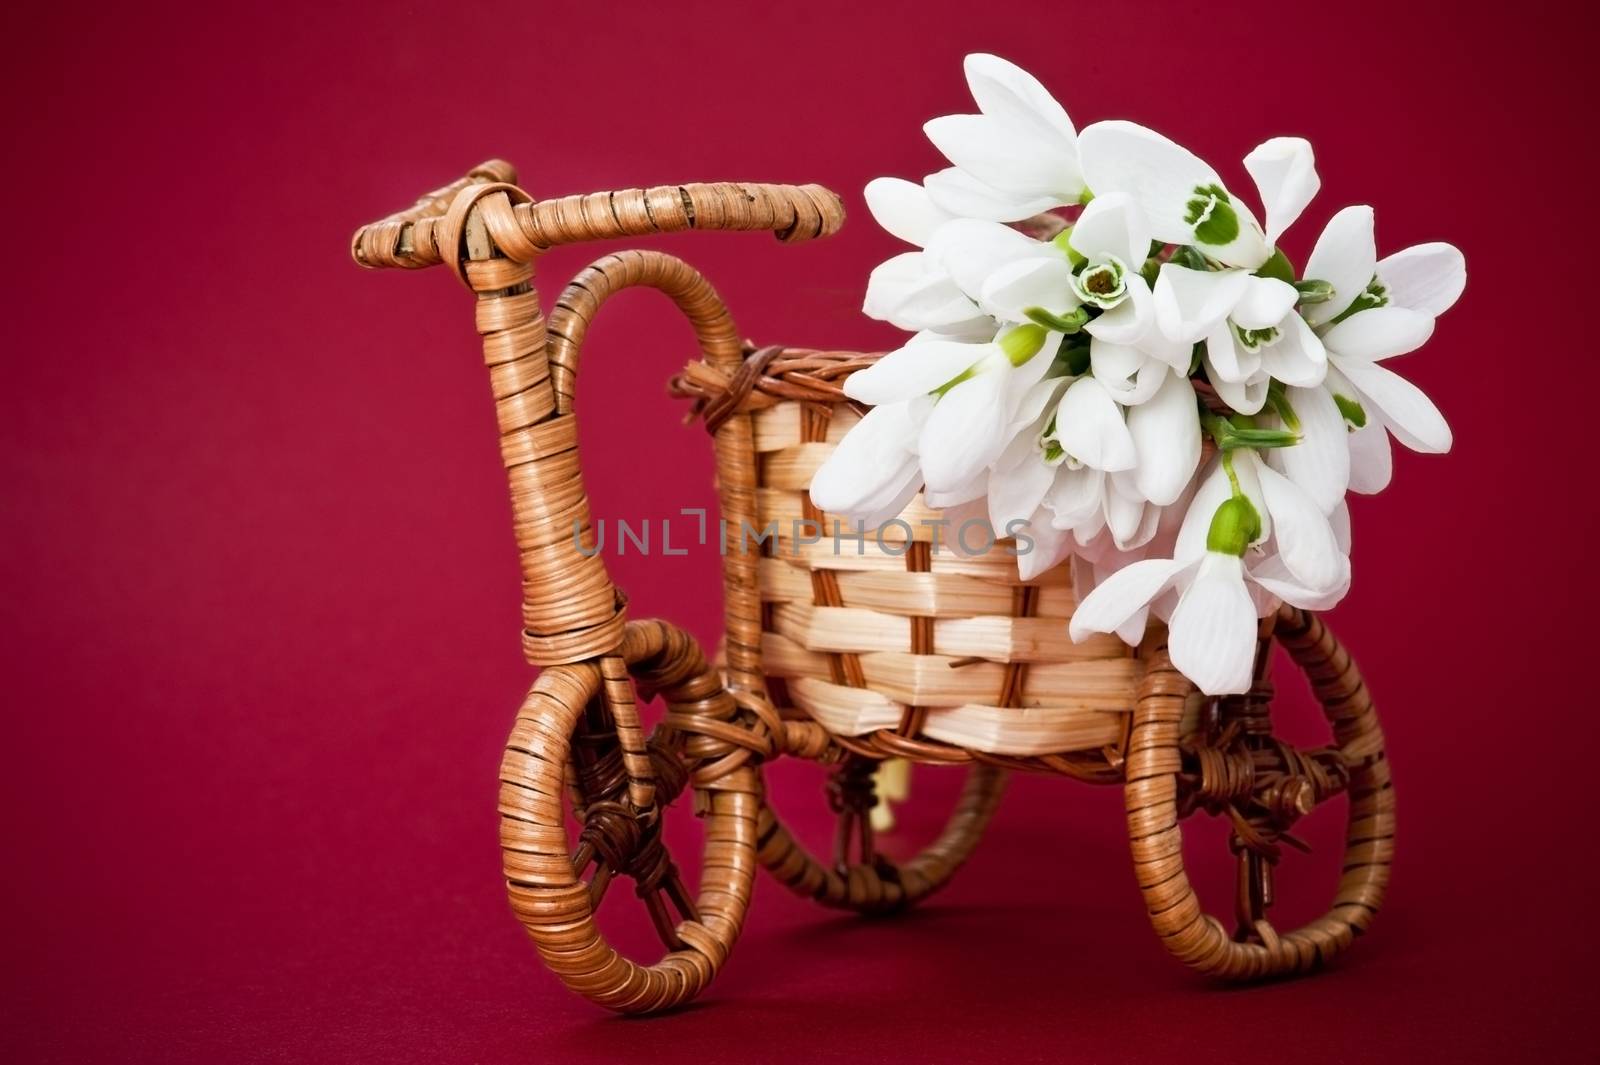 Wooden rods bicycle flowerpot with spring flowers on red background